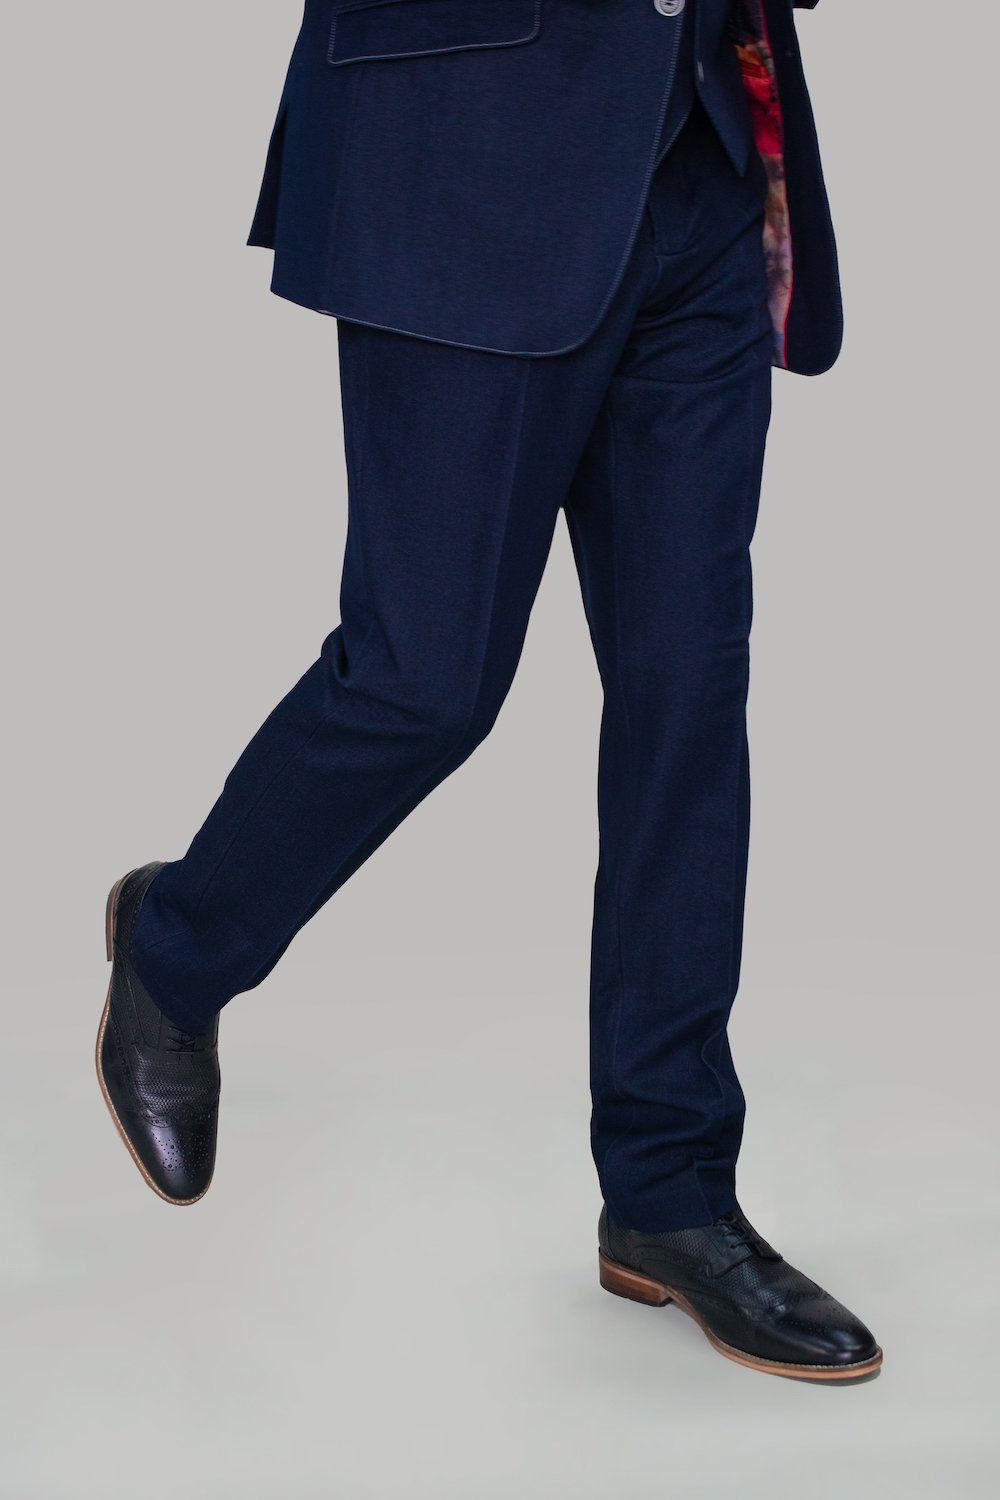 Denim-Effect Navy Trousers - STOCK CLEARANCE - Trousers - 30R - THREADPEPPER